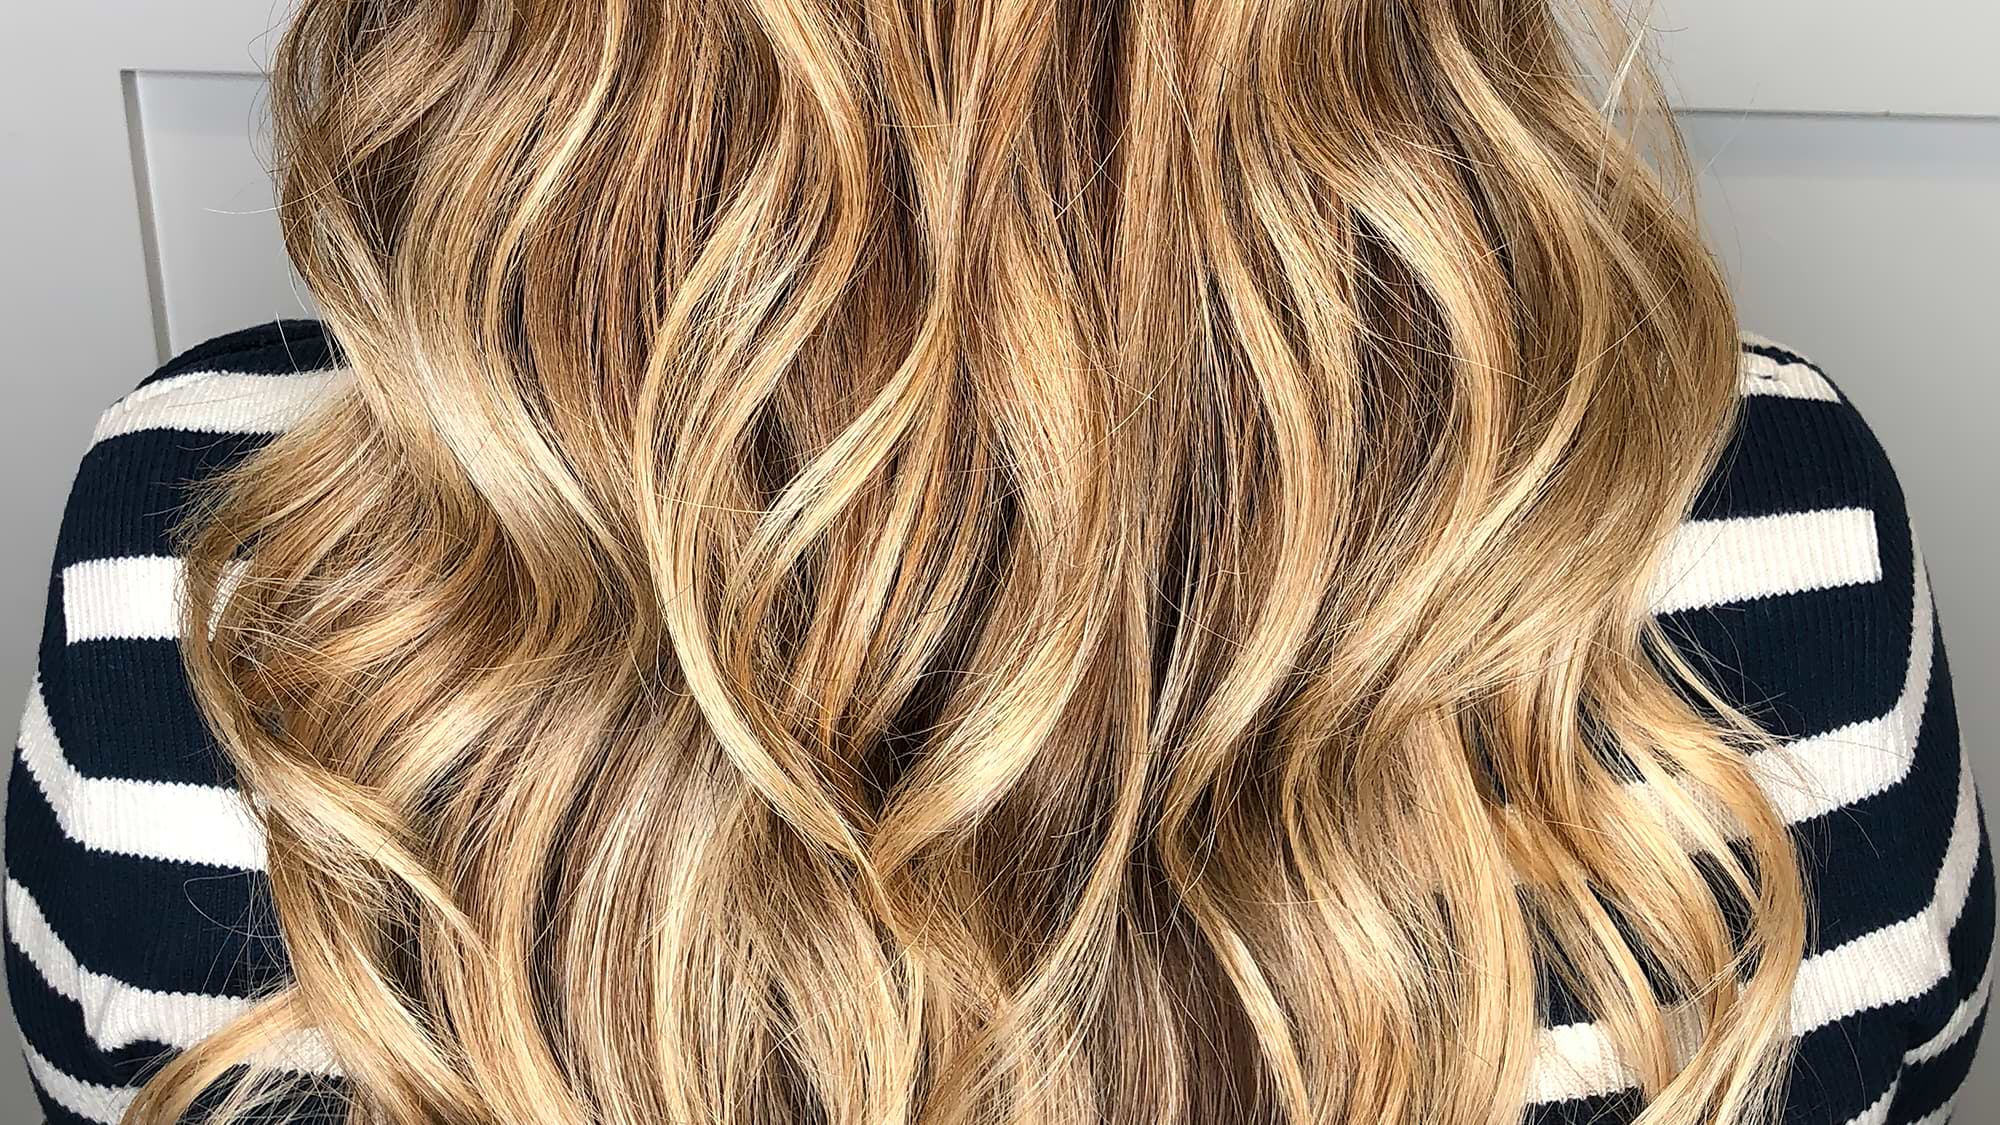 Balayage Is Here To Stay!